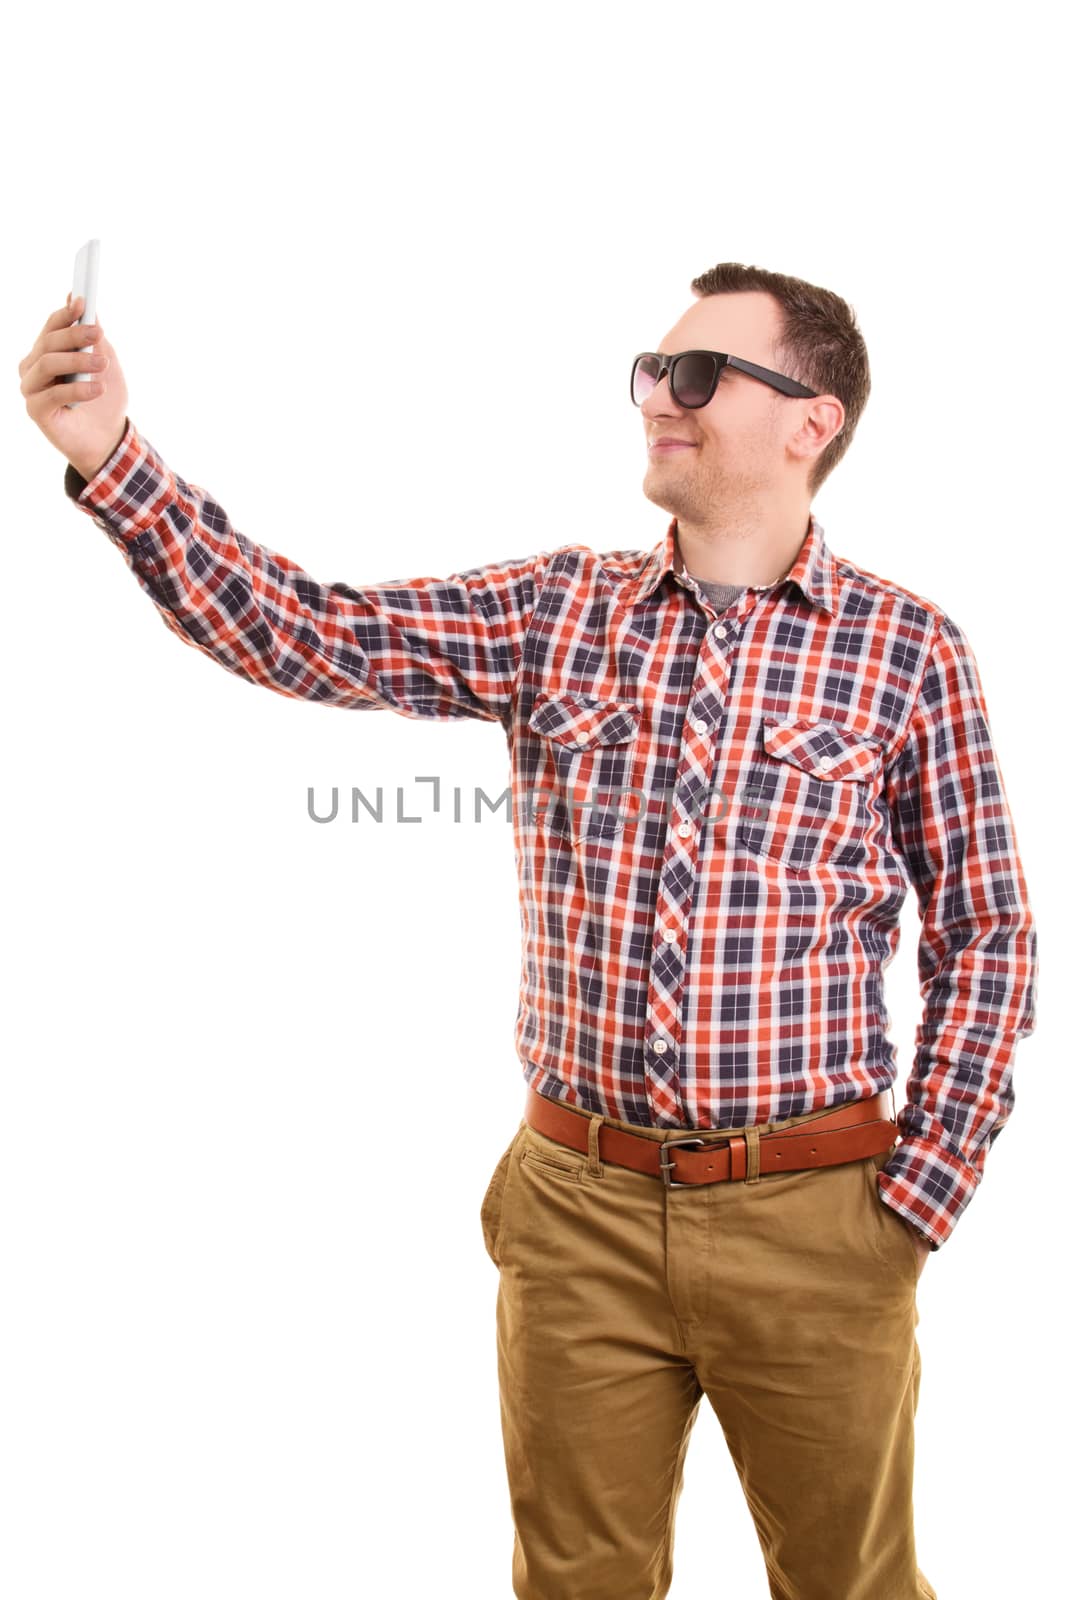 Fashionable young man taking a selfie by Mendelex